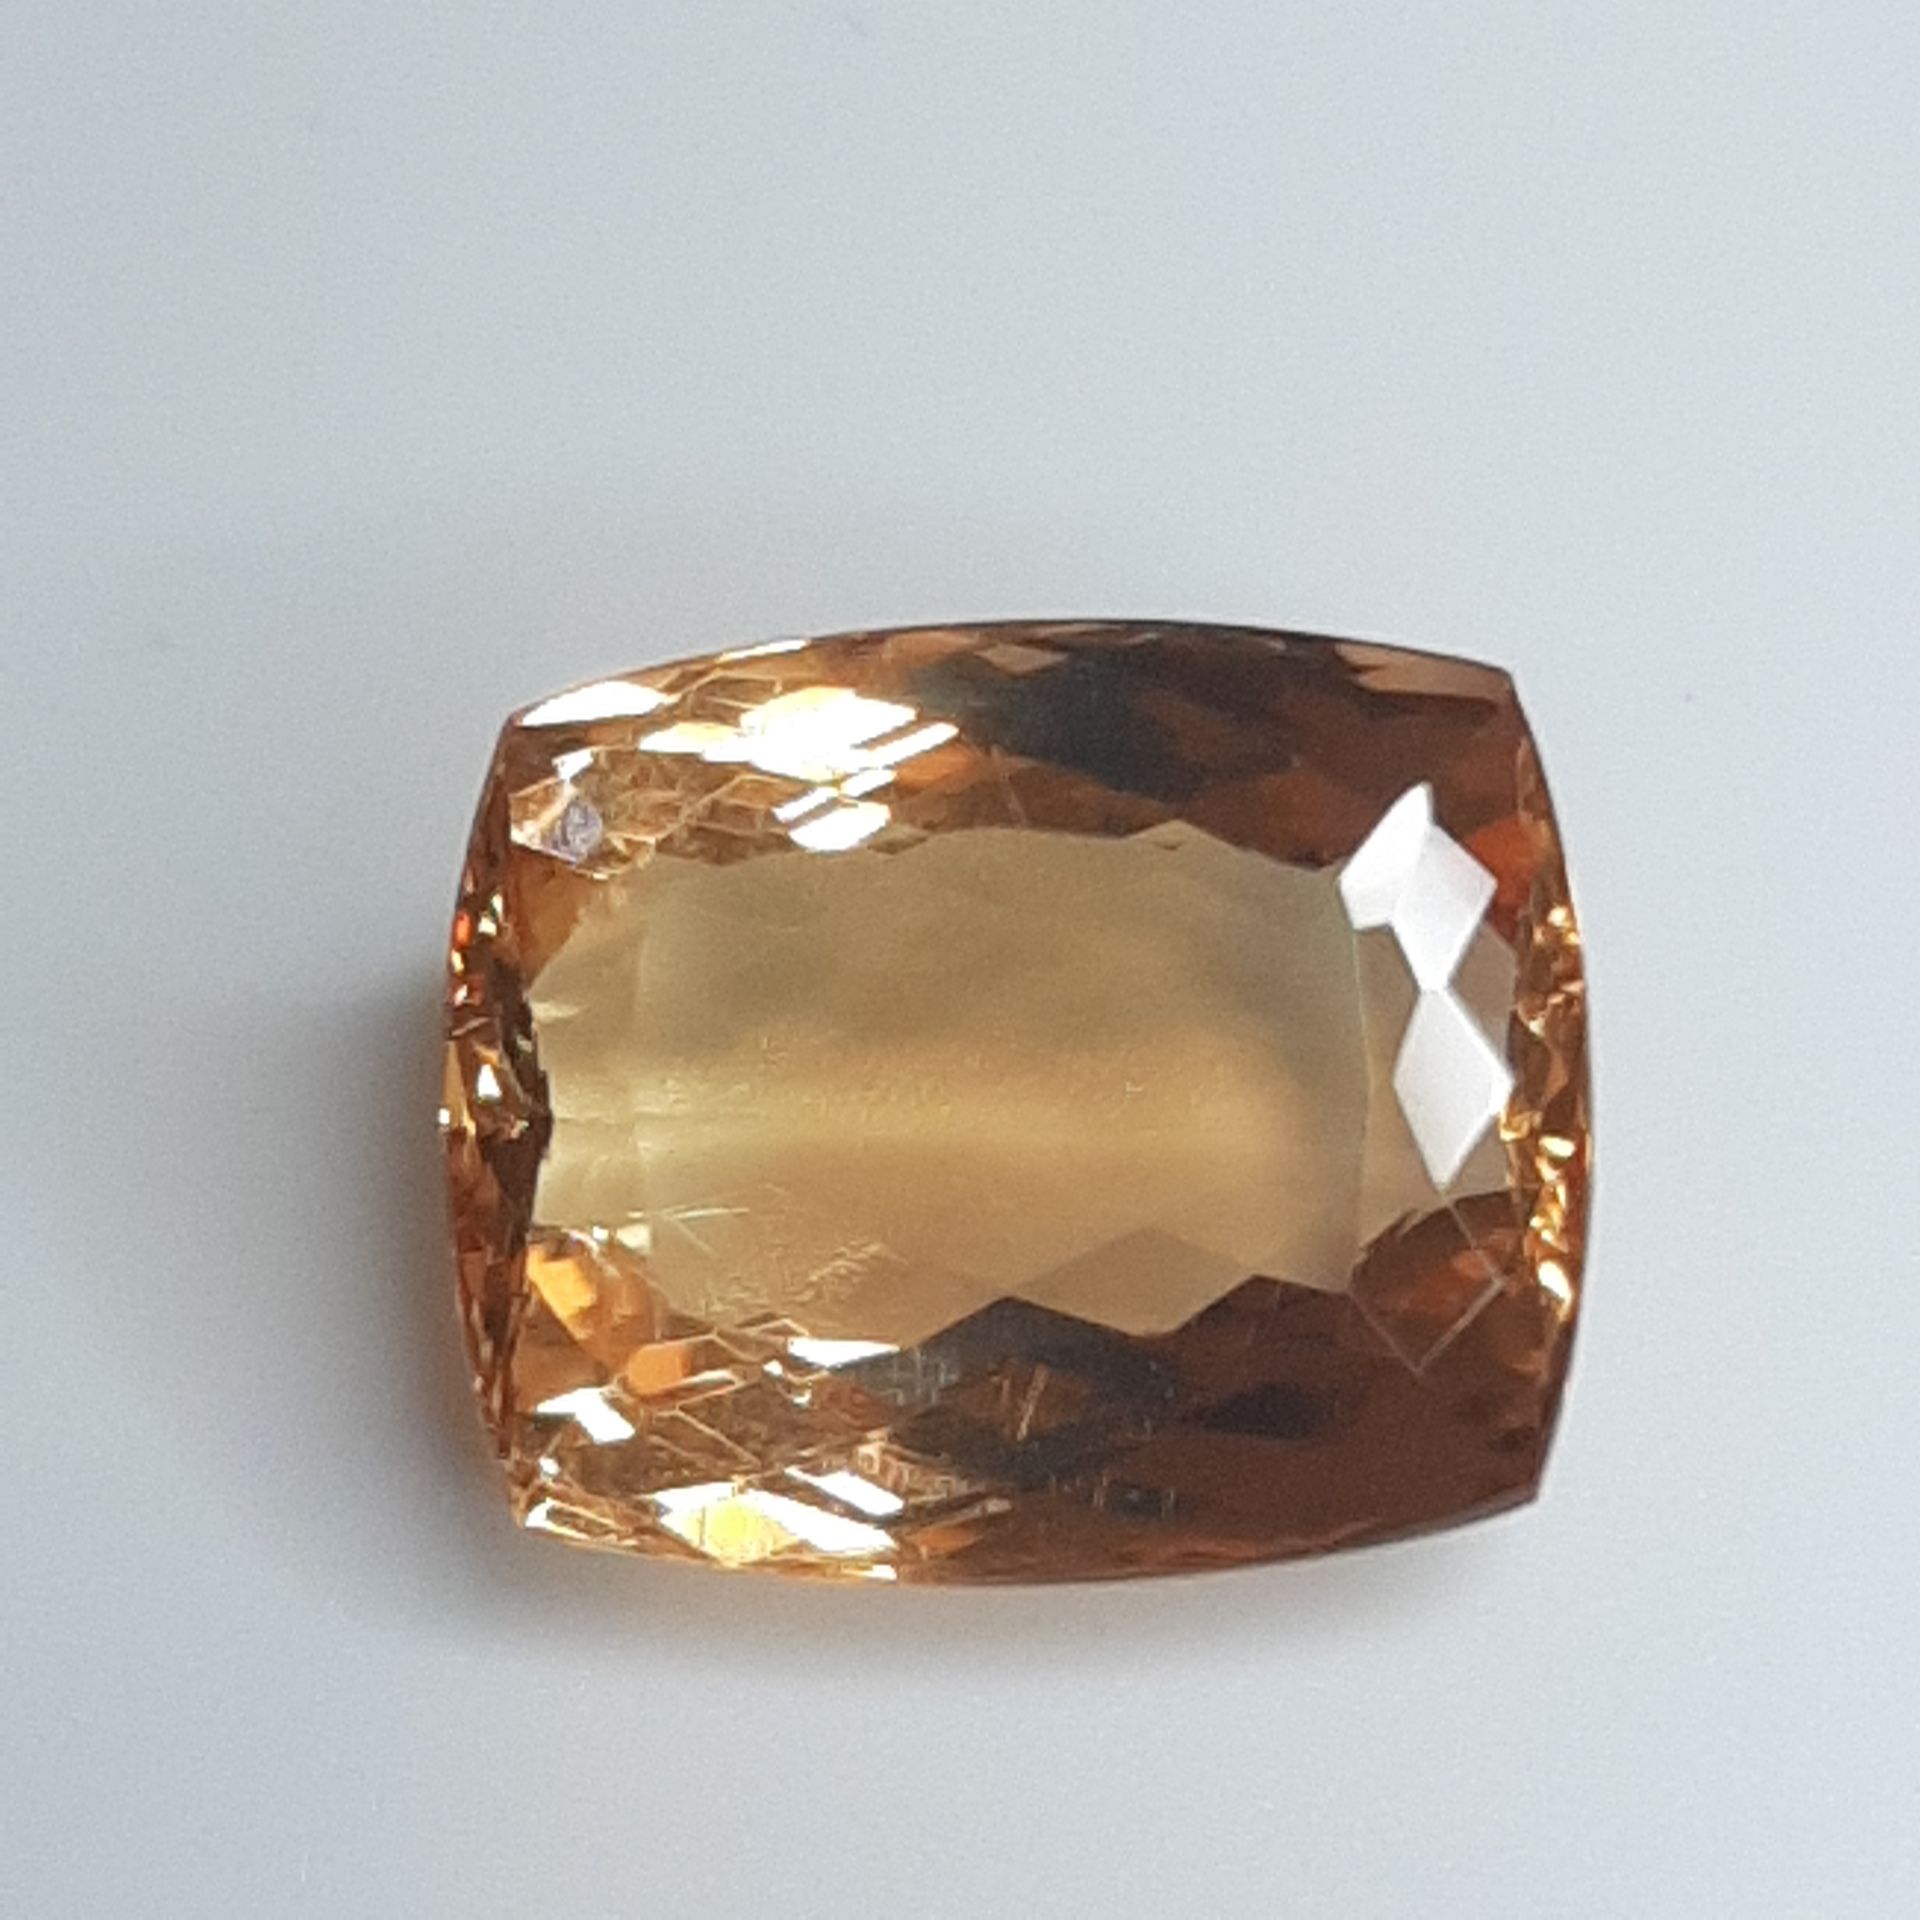 Topaze impériale - BRESIL - 7.65 cts IMPERIAL TOPAZE - From Brazil Ouro Preto - &hellip;